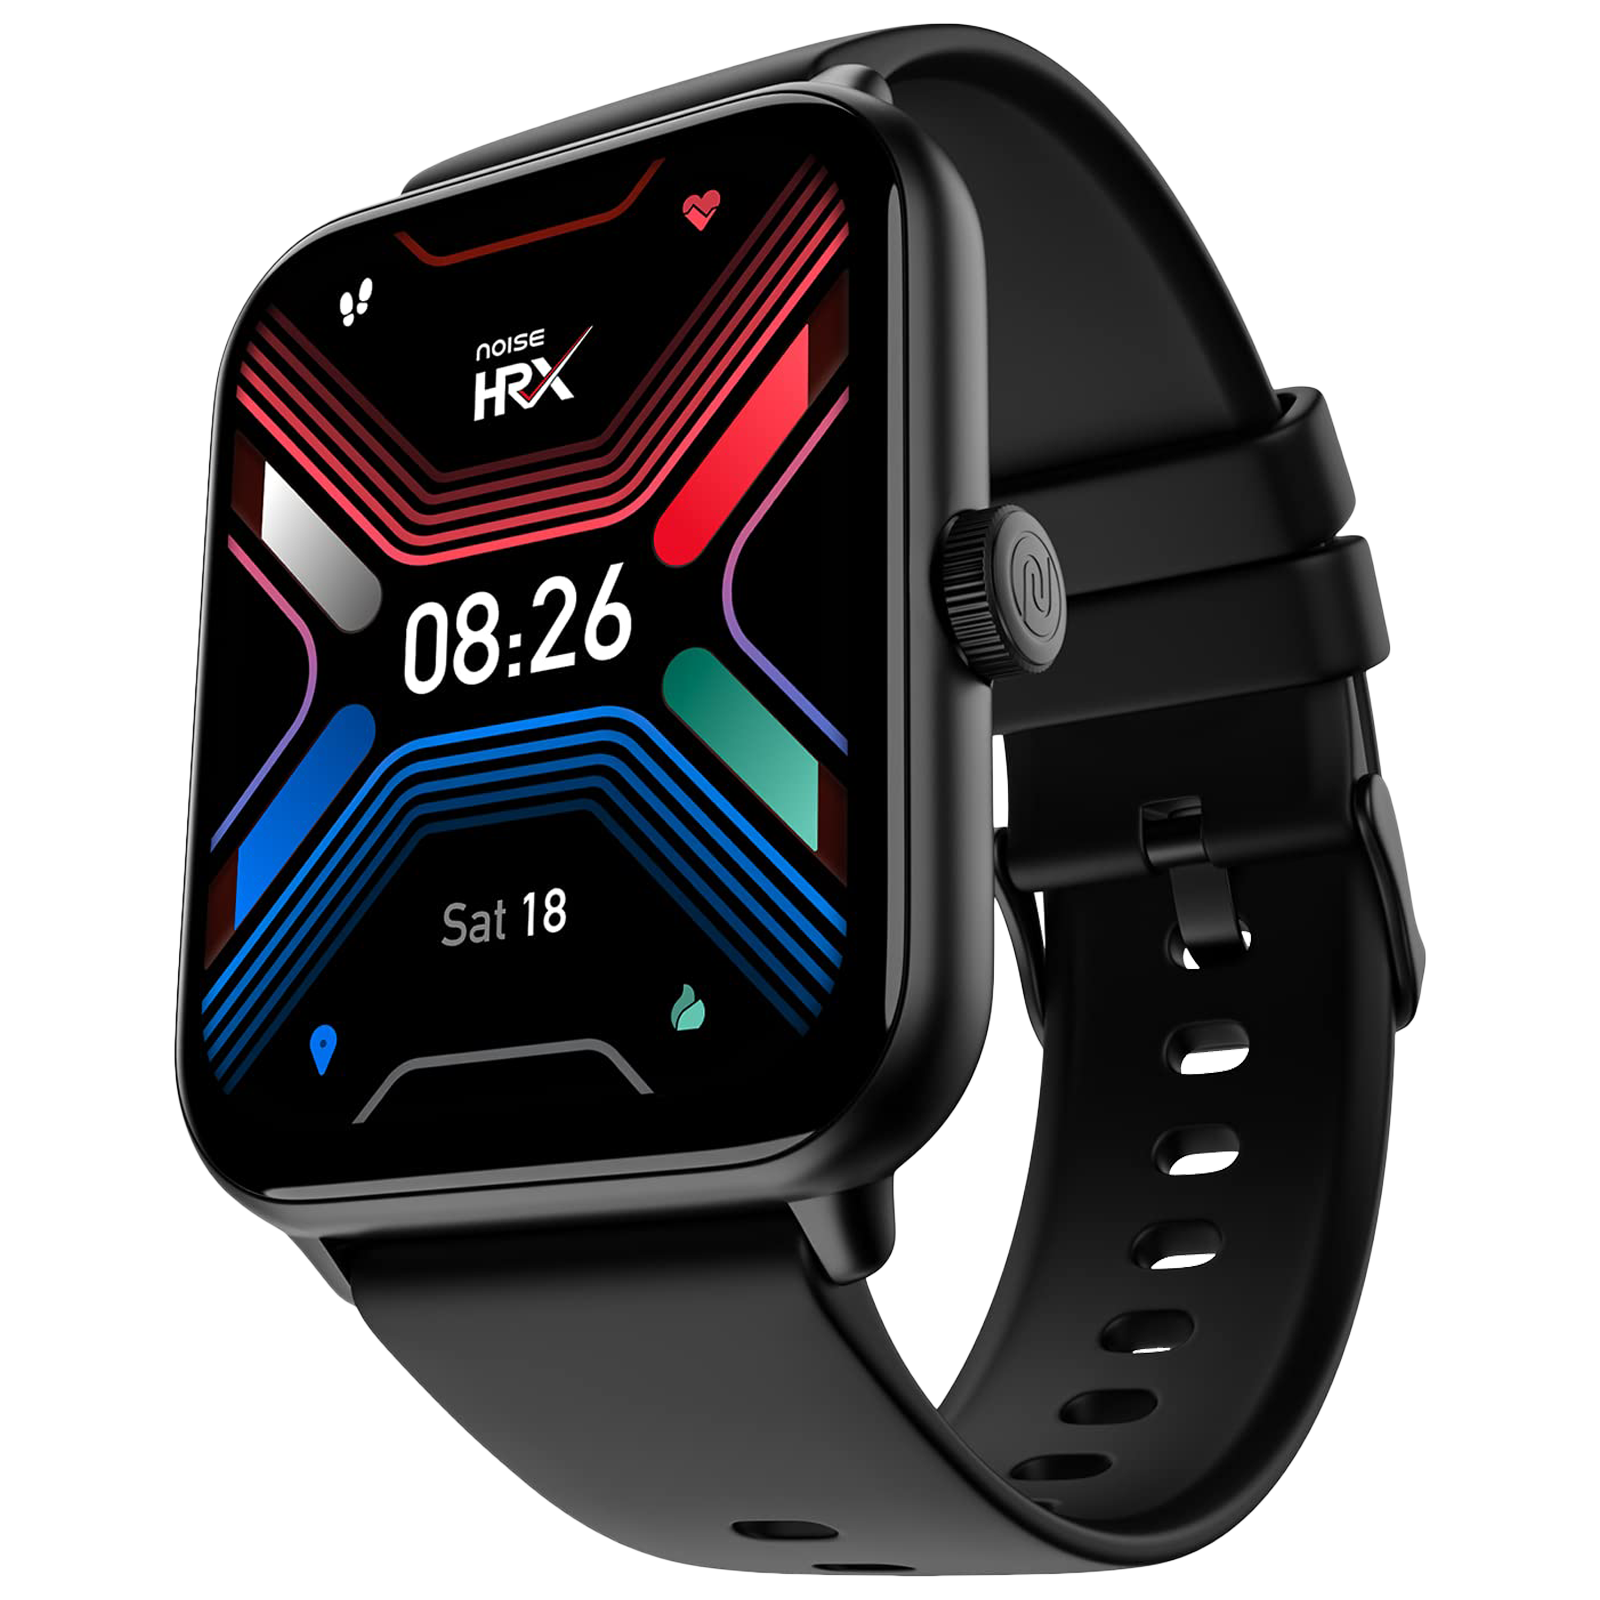 Noise HRX Sprint Smartwatch with Bluetooth Calling (48.5mm TFT Display, IP67 Water Resistant, Jet Black Strap)